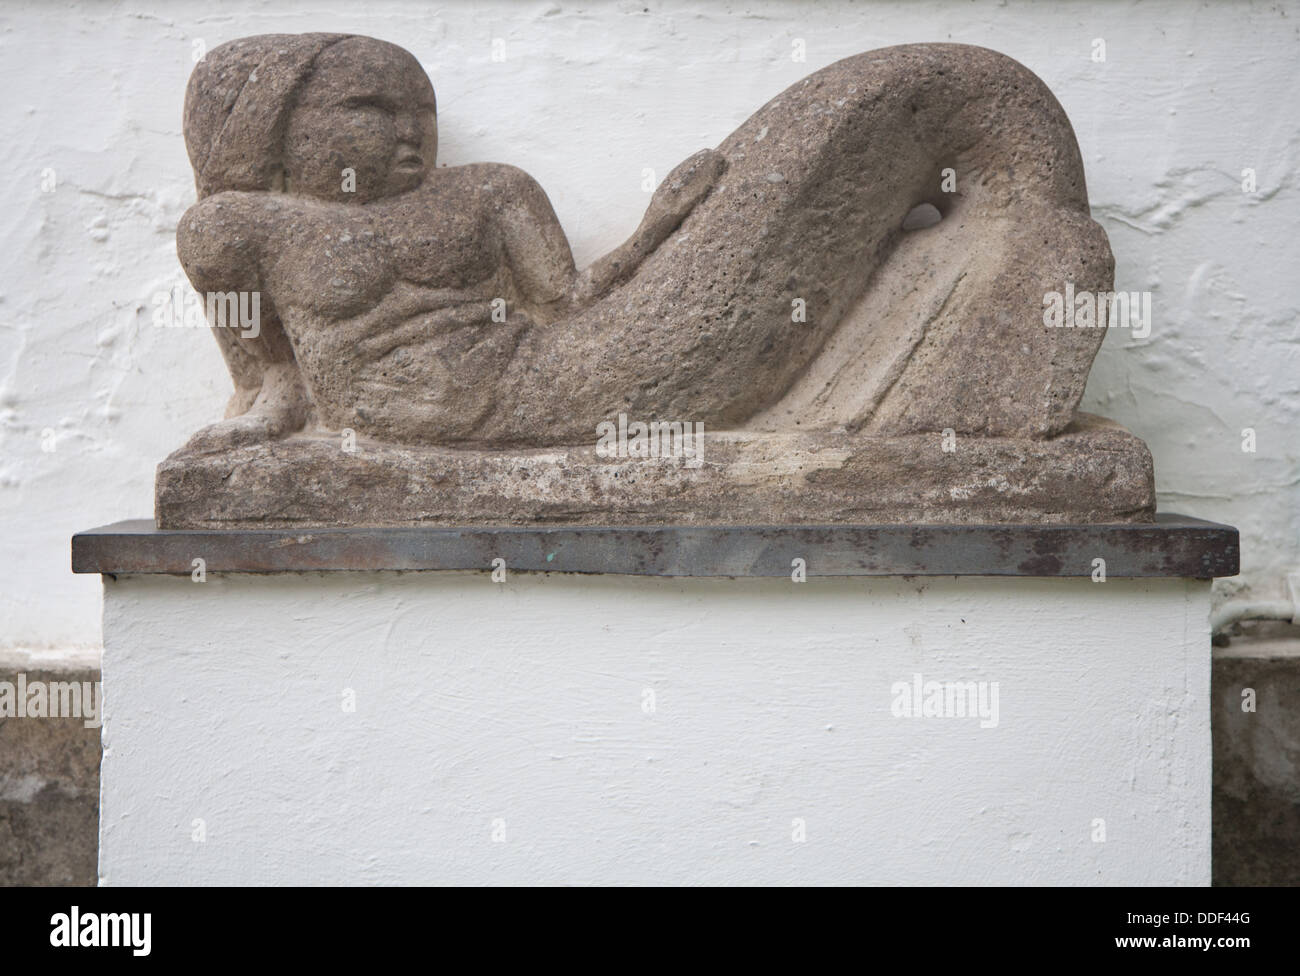 Stone carving / statue of a reclining woman / mermaid in Portmeirion Village Stock Photo